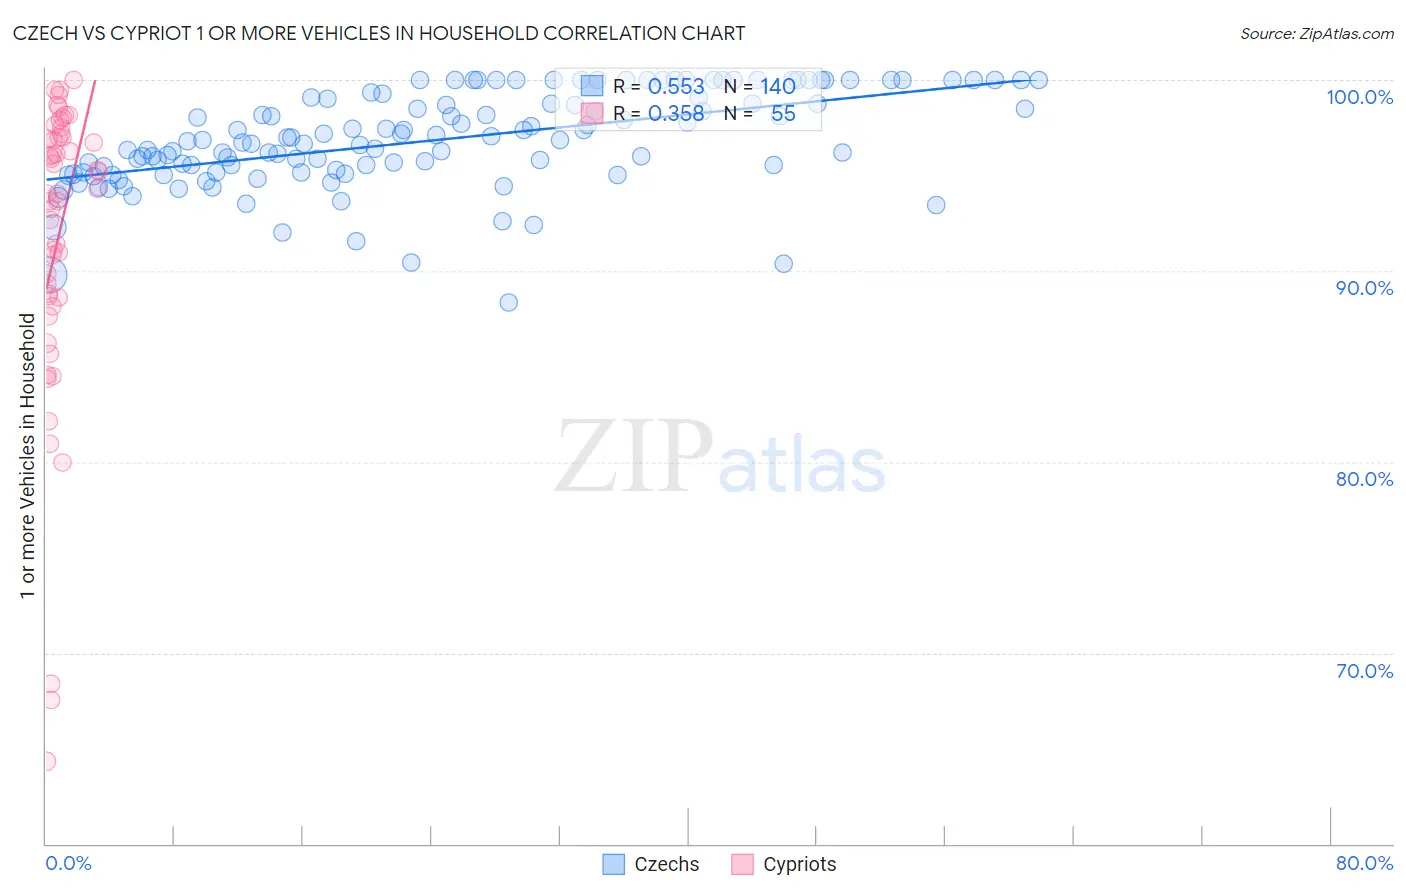 Czech vs Cypriot 1 or more Vehicles in Household